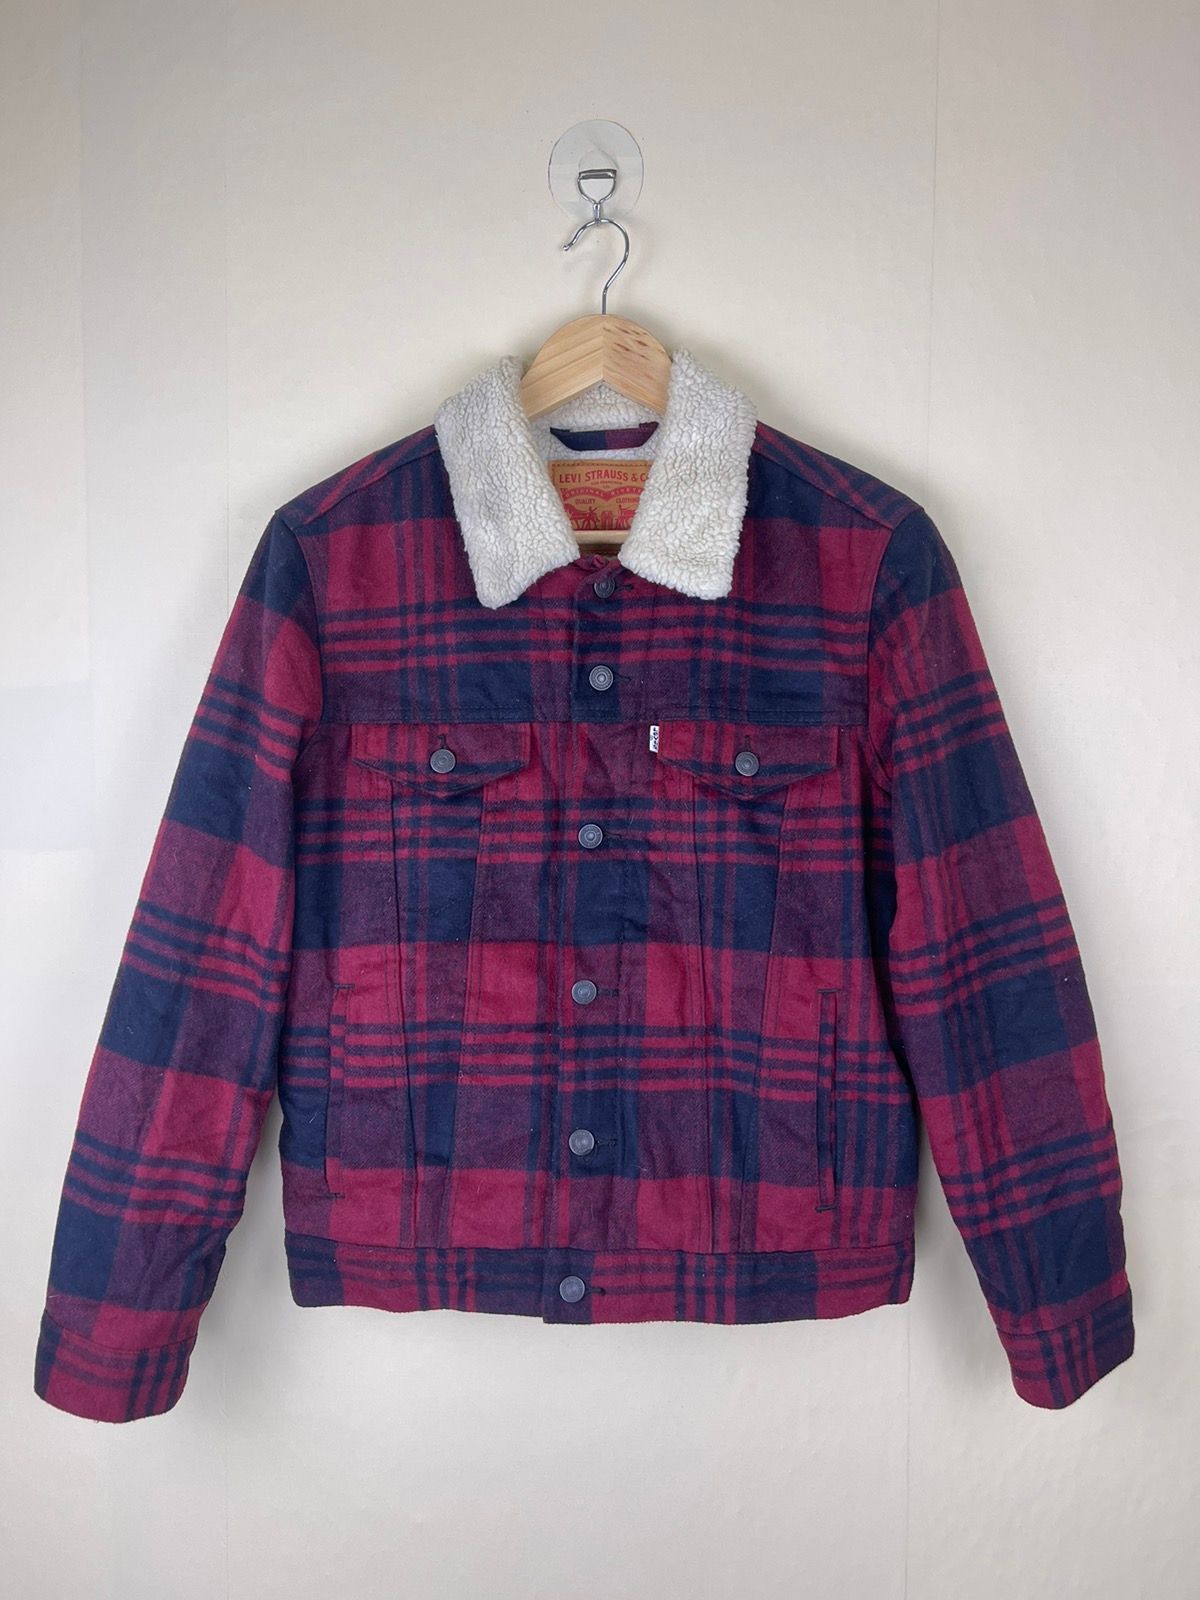 Pre-owned Levis X Levis Vintage Clothing Vintage Levi's Collar Sherpa Red Plaid Trucker Jacket (size Medium)